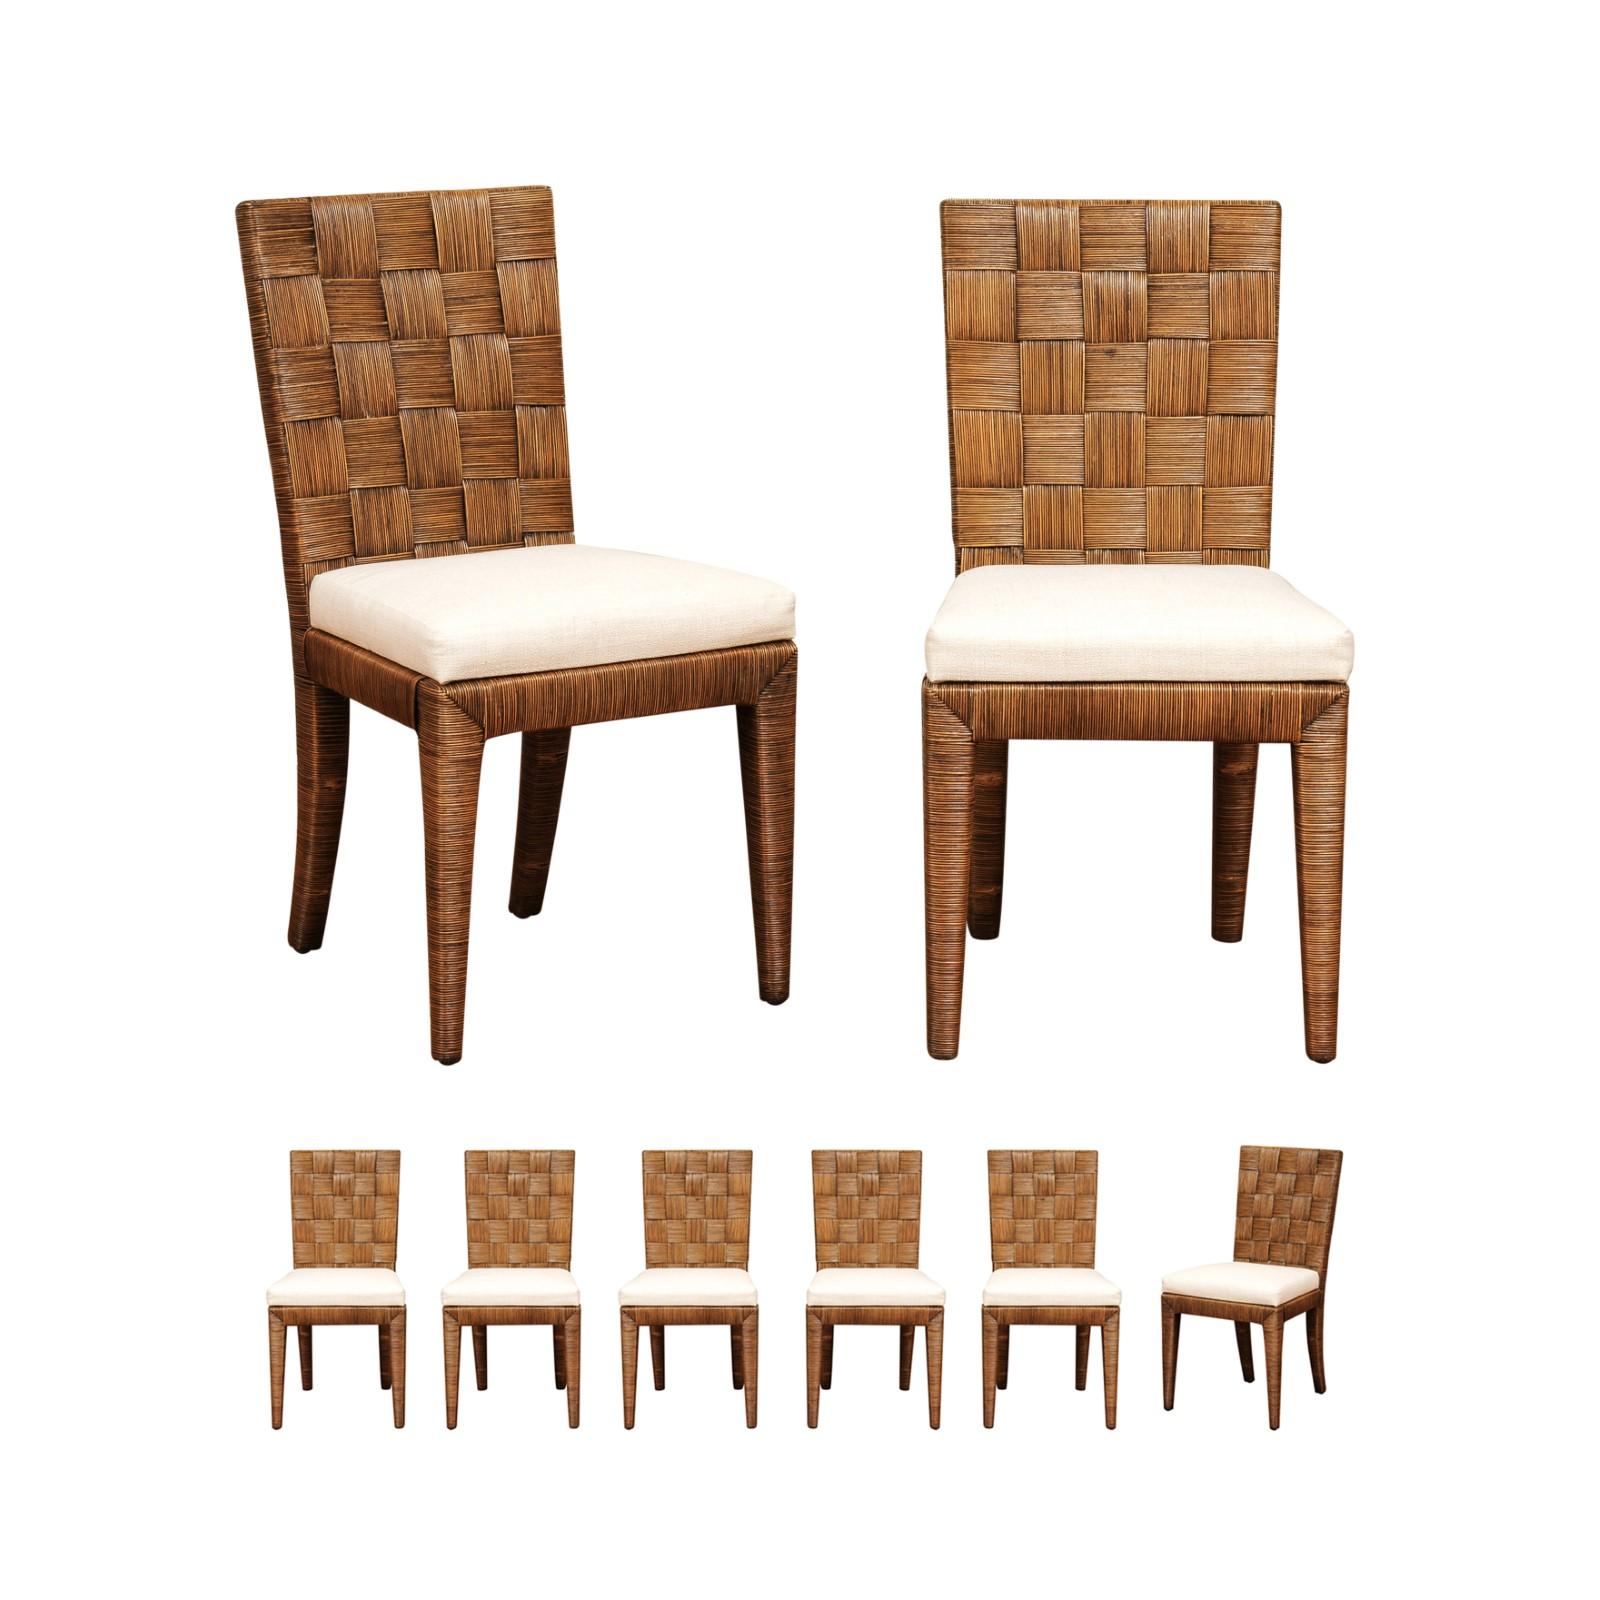 Stellar Restored Set of 8 Block Island Cane Chairs by John Hutton for Donghia For Sale 13